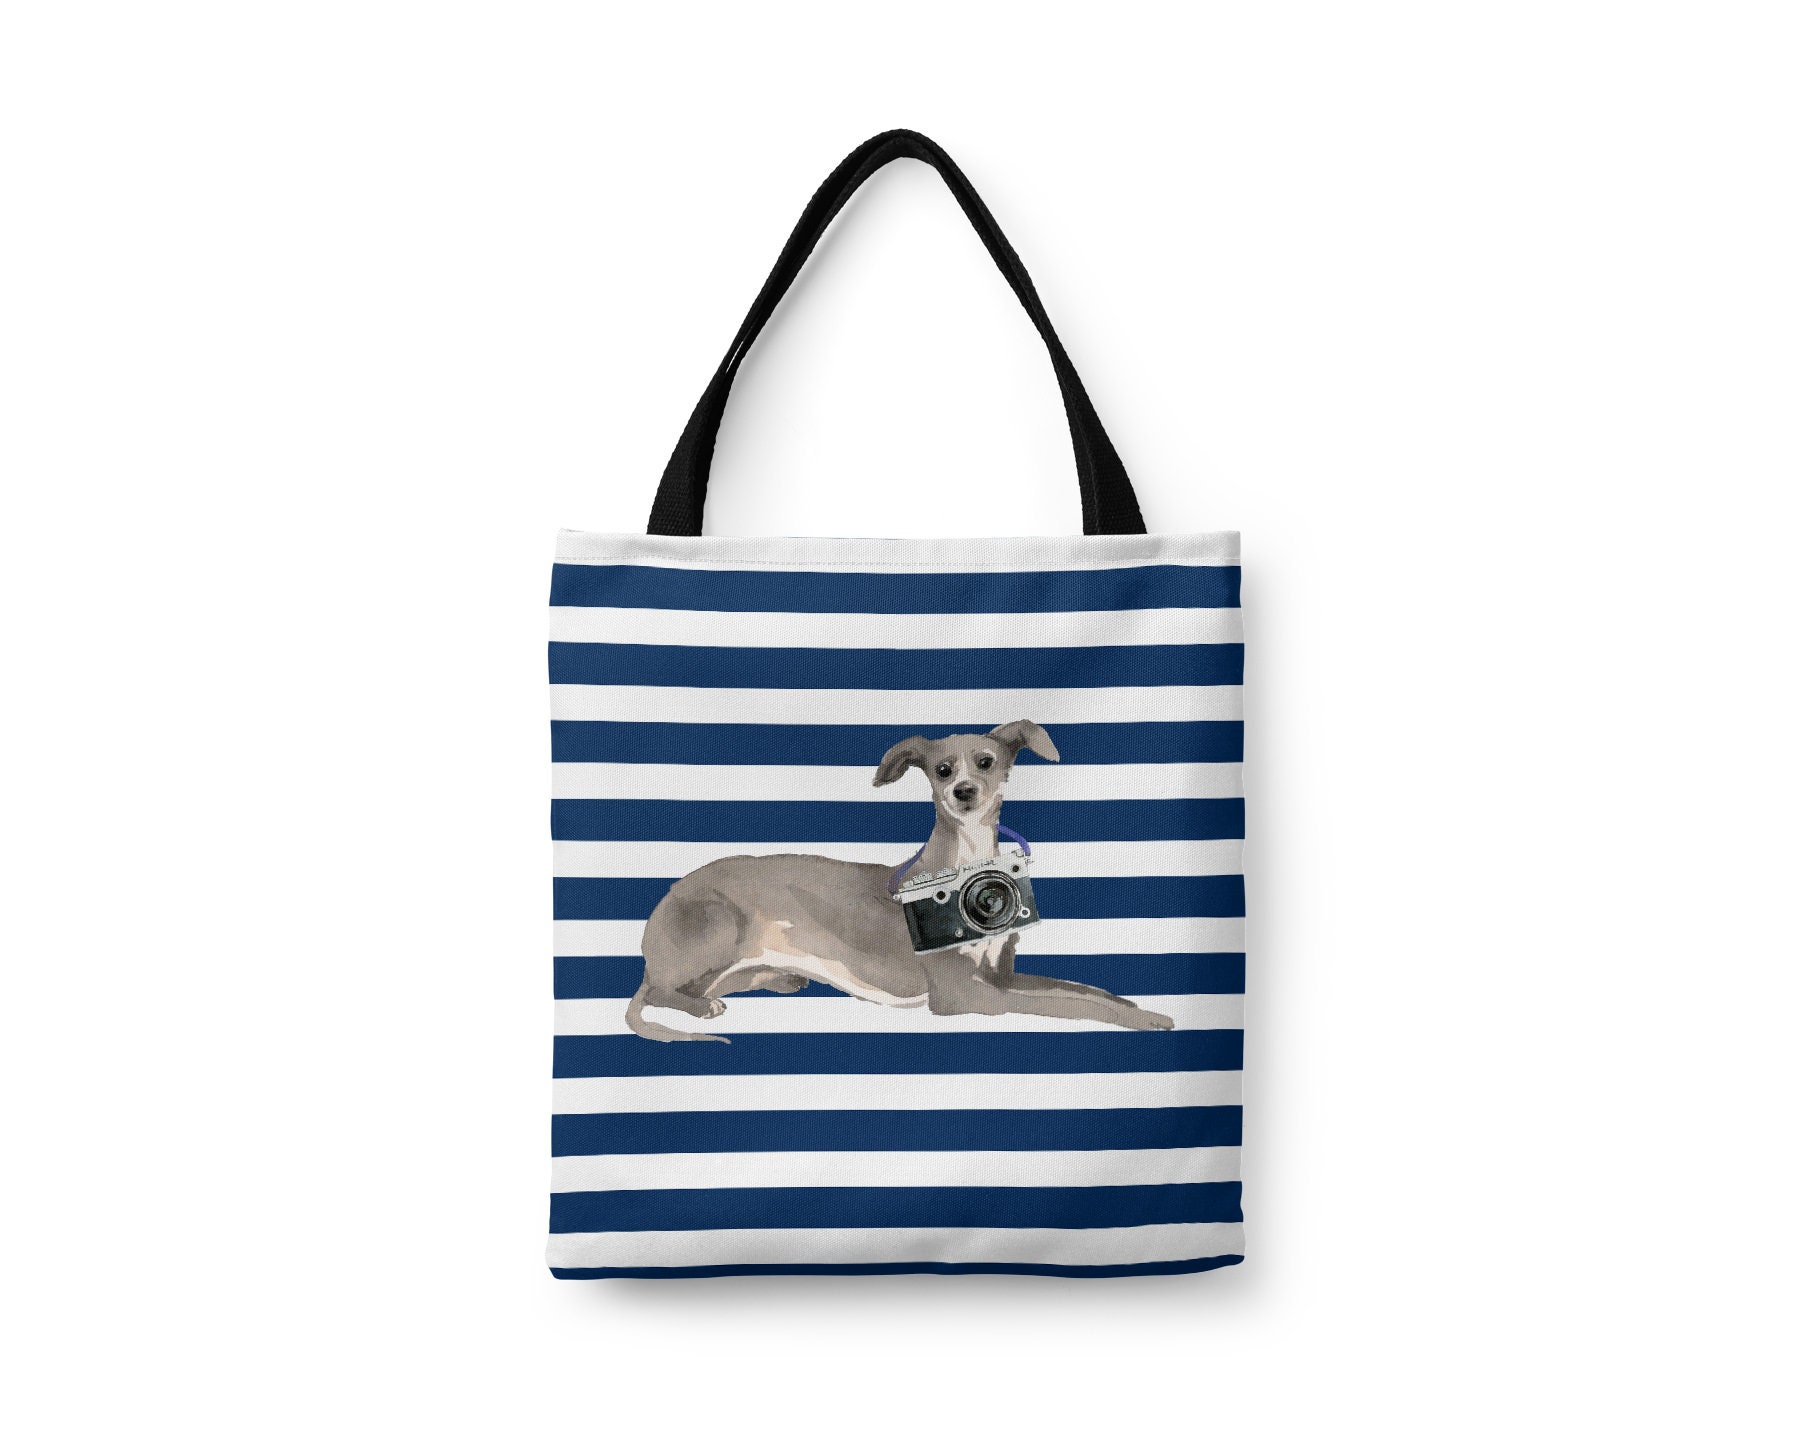 Italian Greyhound Dog Tote Bag - Illustrated Dogs & 6 Travel Inspired Styles. All Purpose For Work, Shopping, Life. Iggy Shoulder Bag